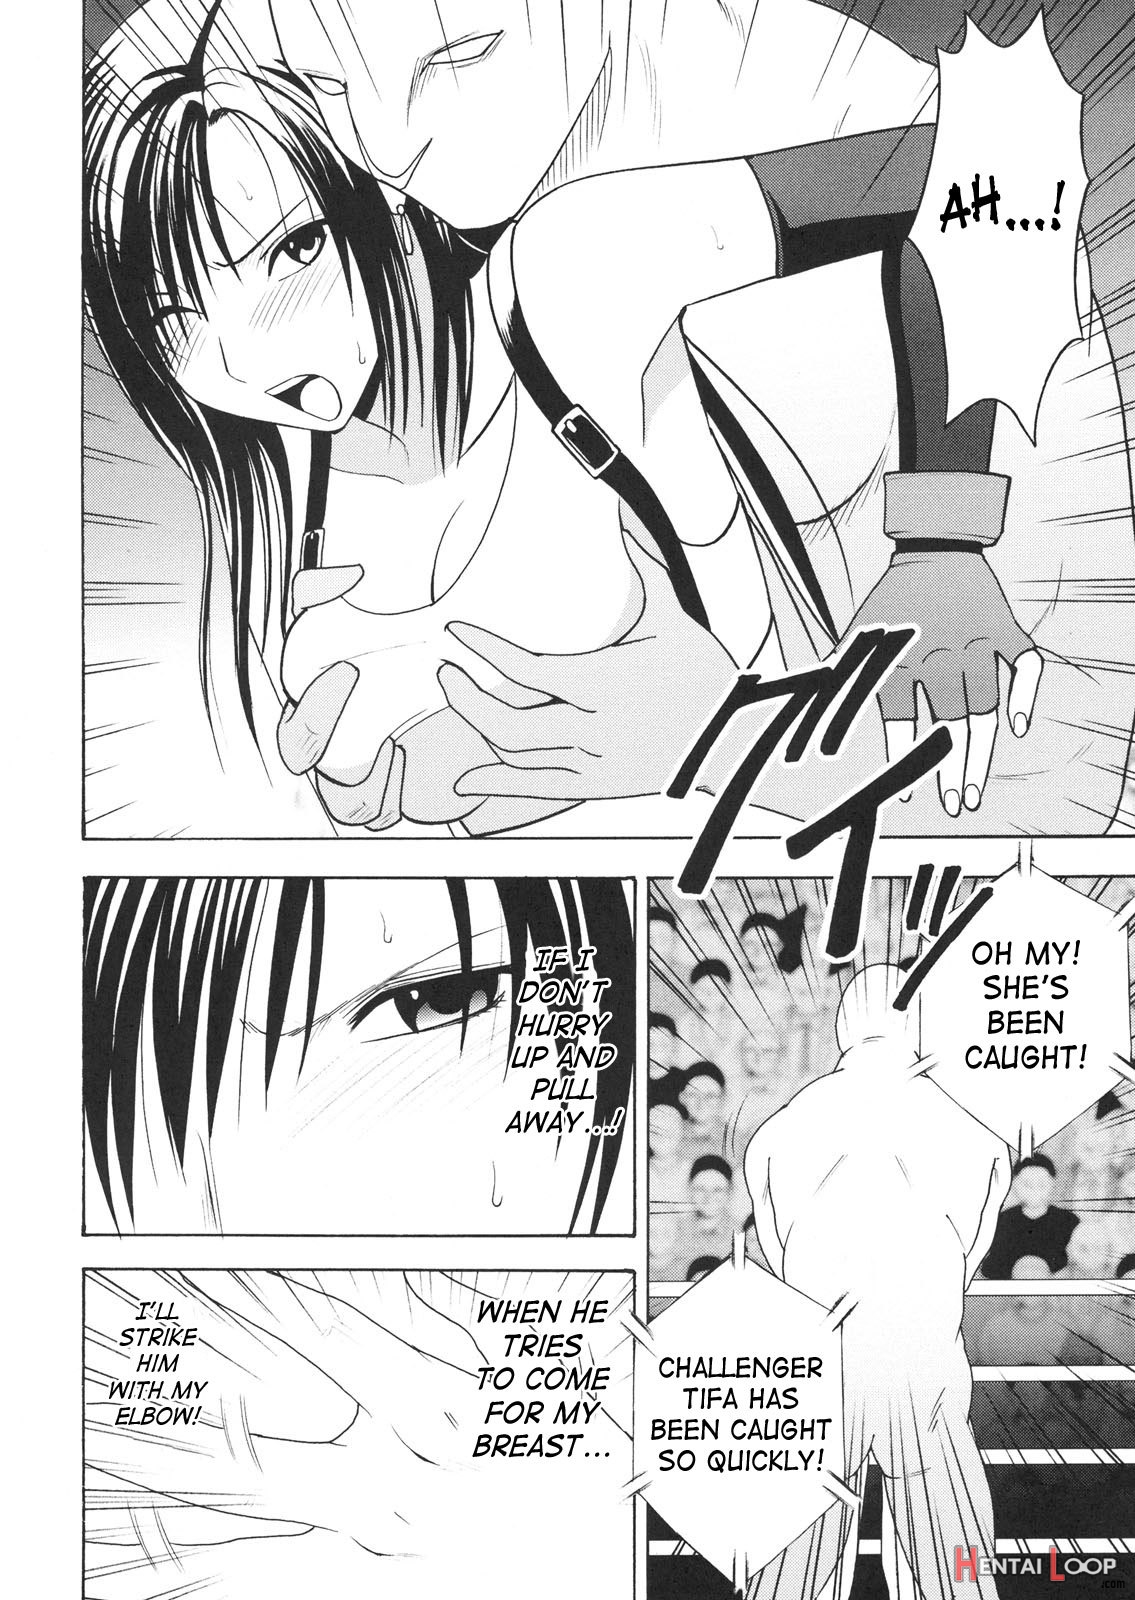 Tifa Before Climax page 30